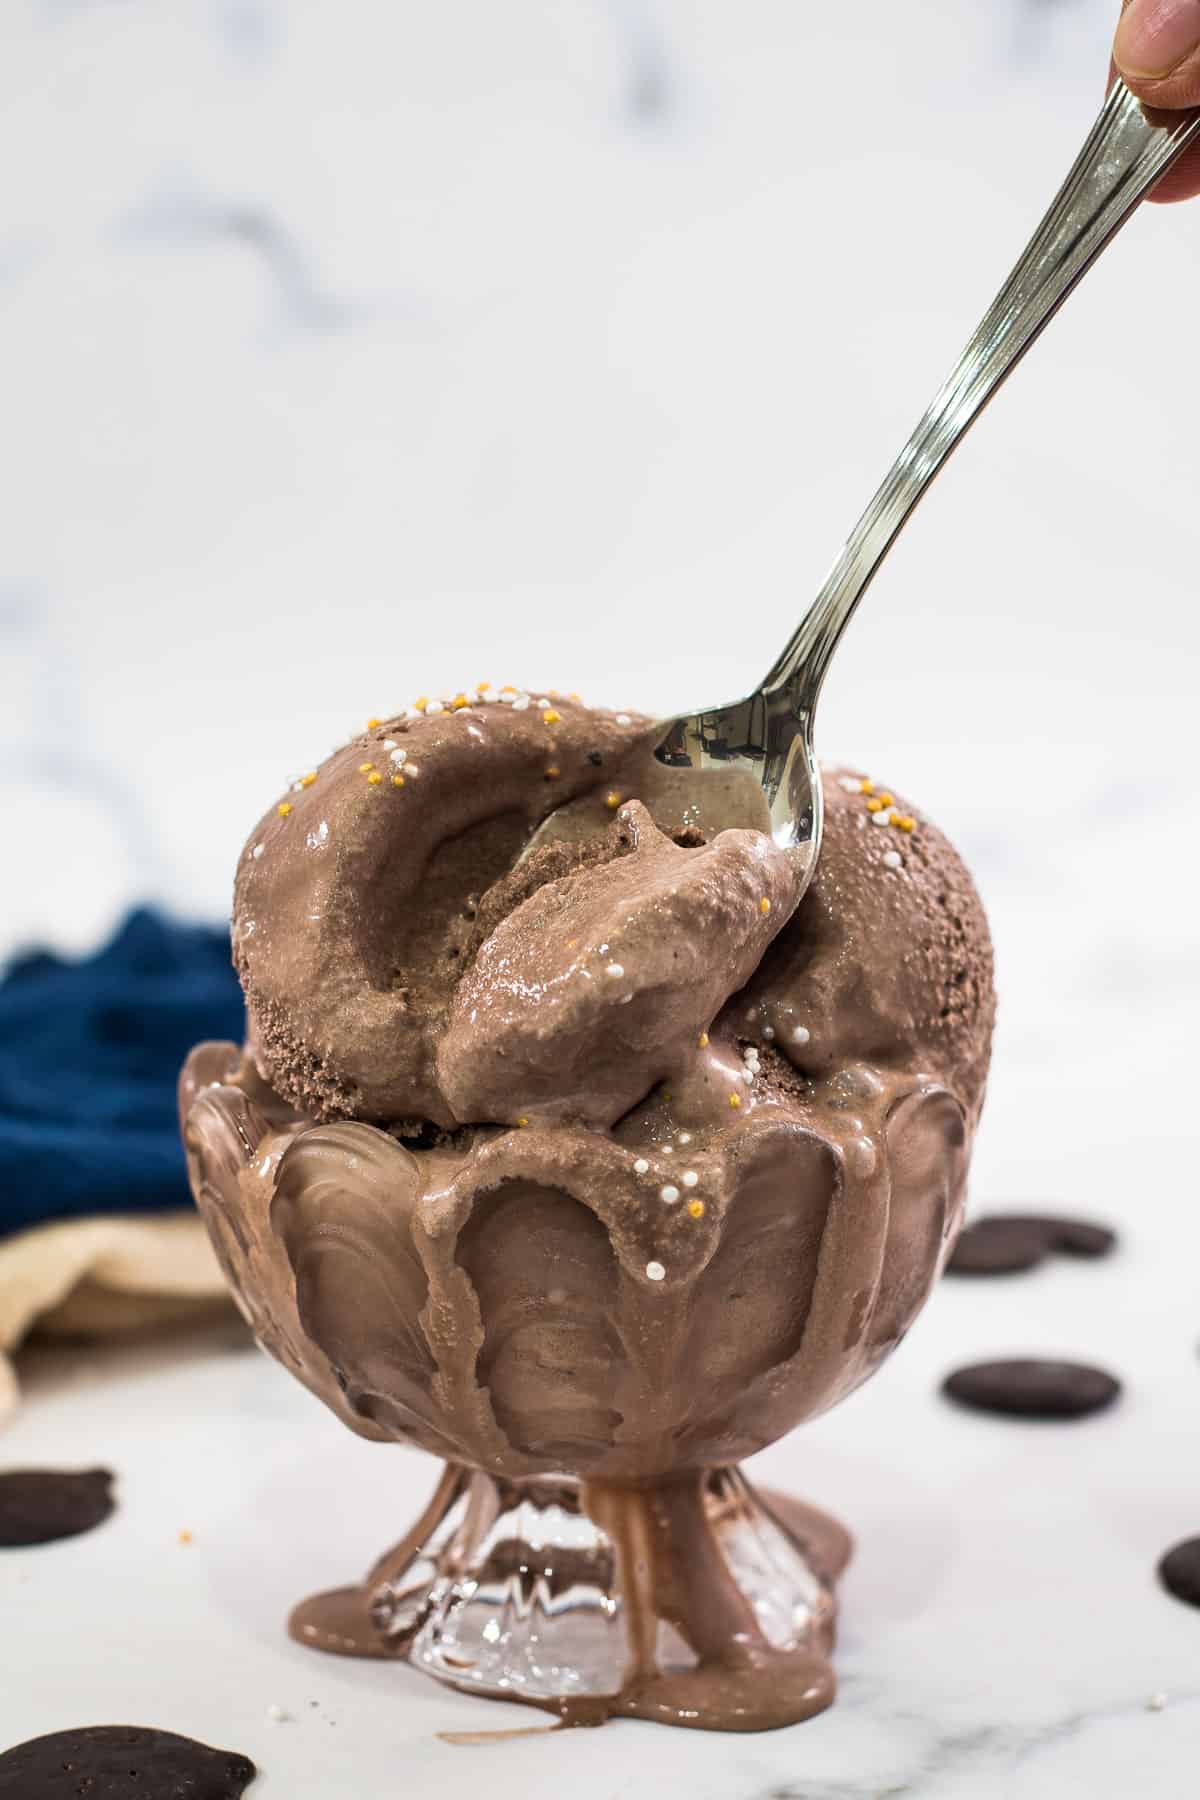 Using a spoon to scoop out chocolate ice cream from a dessert bowl